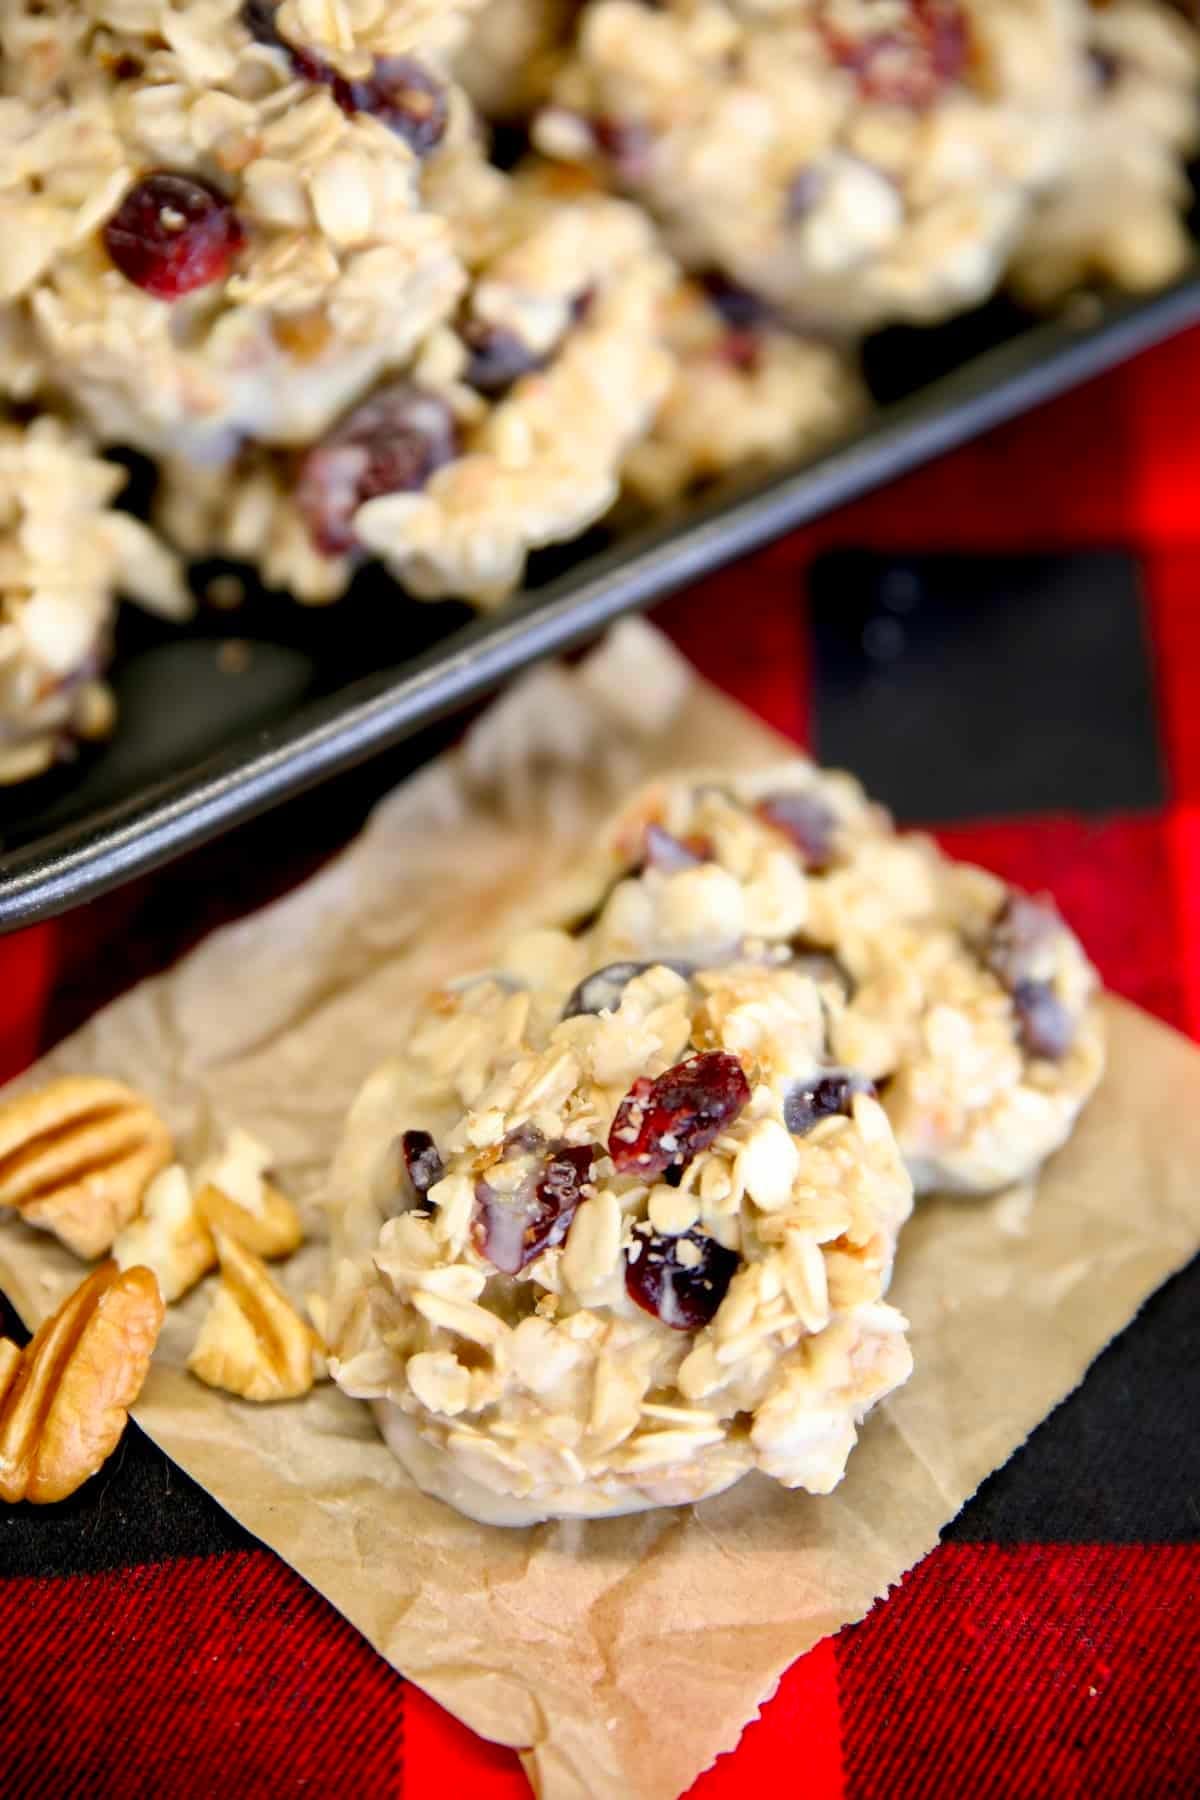 Oatmeal cookies with cranberries and nuts.